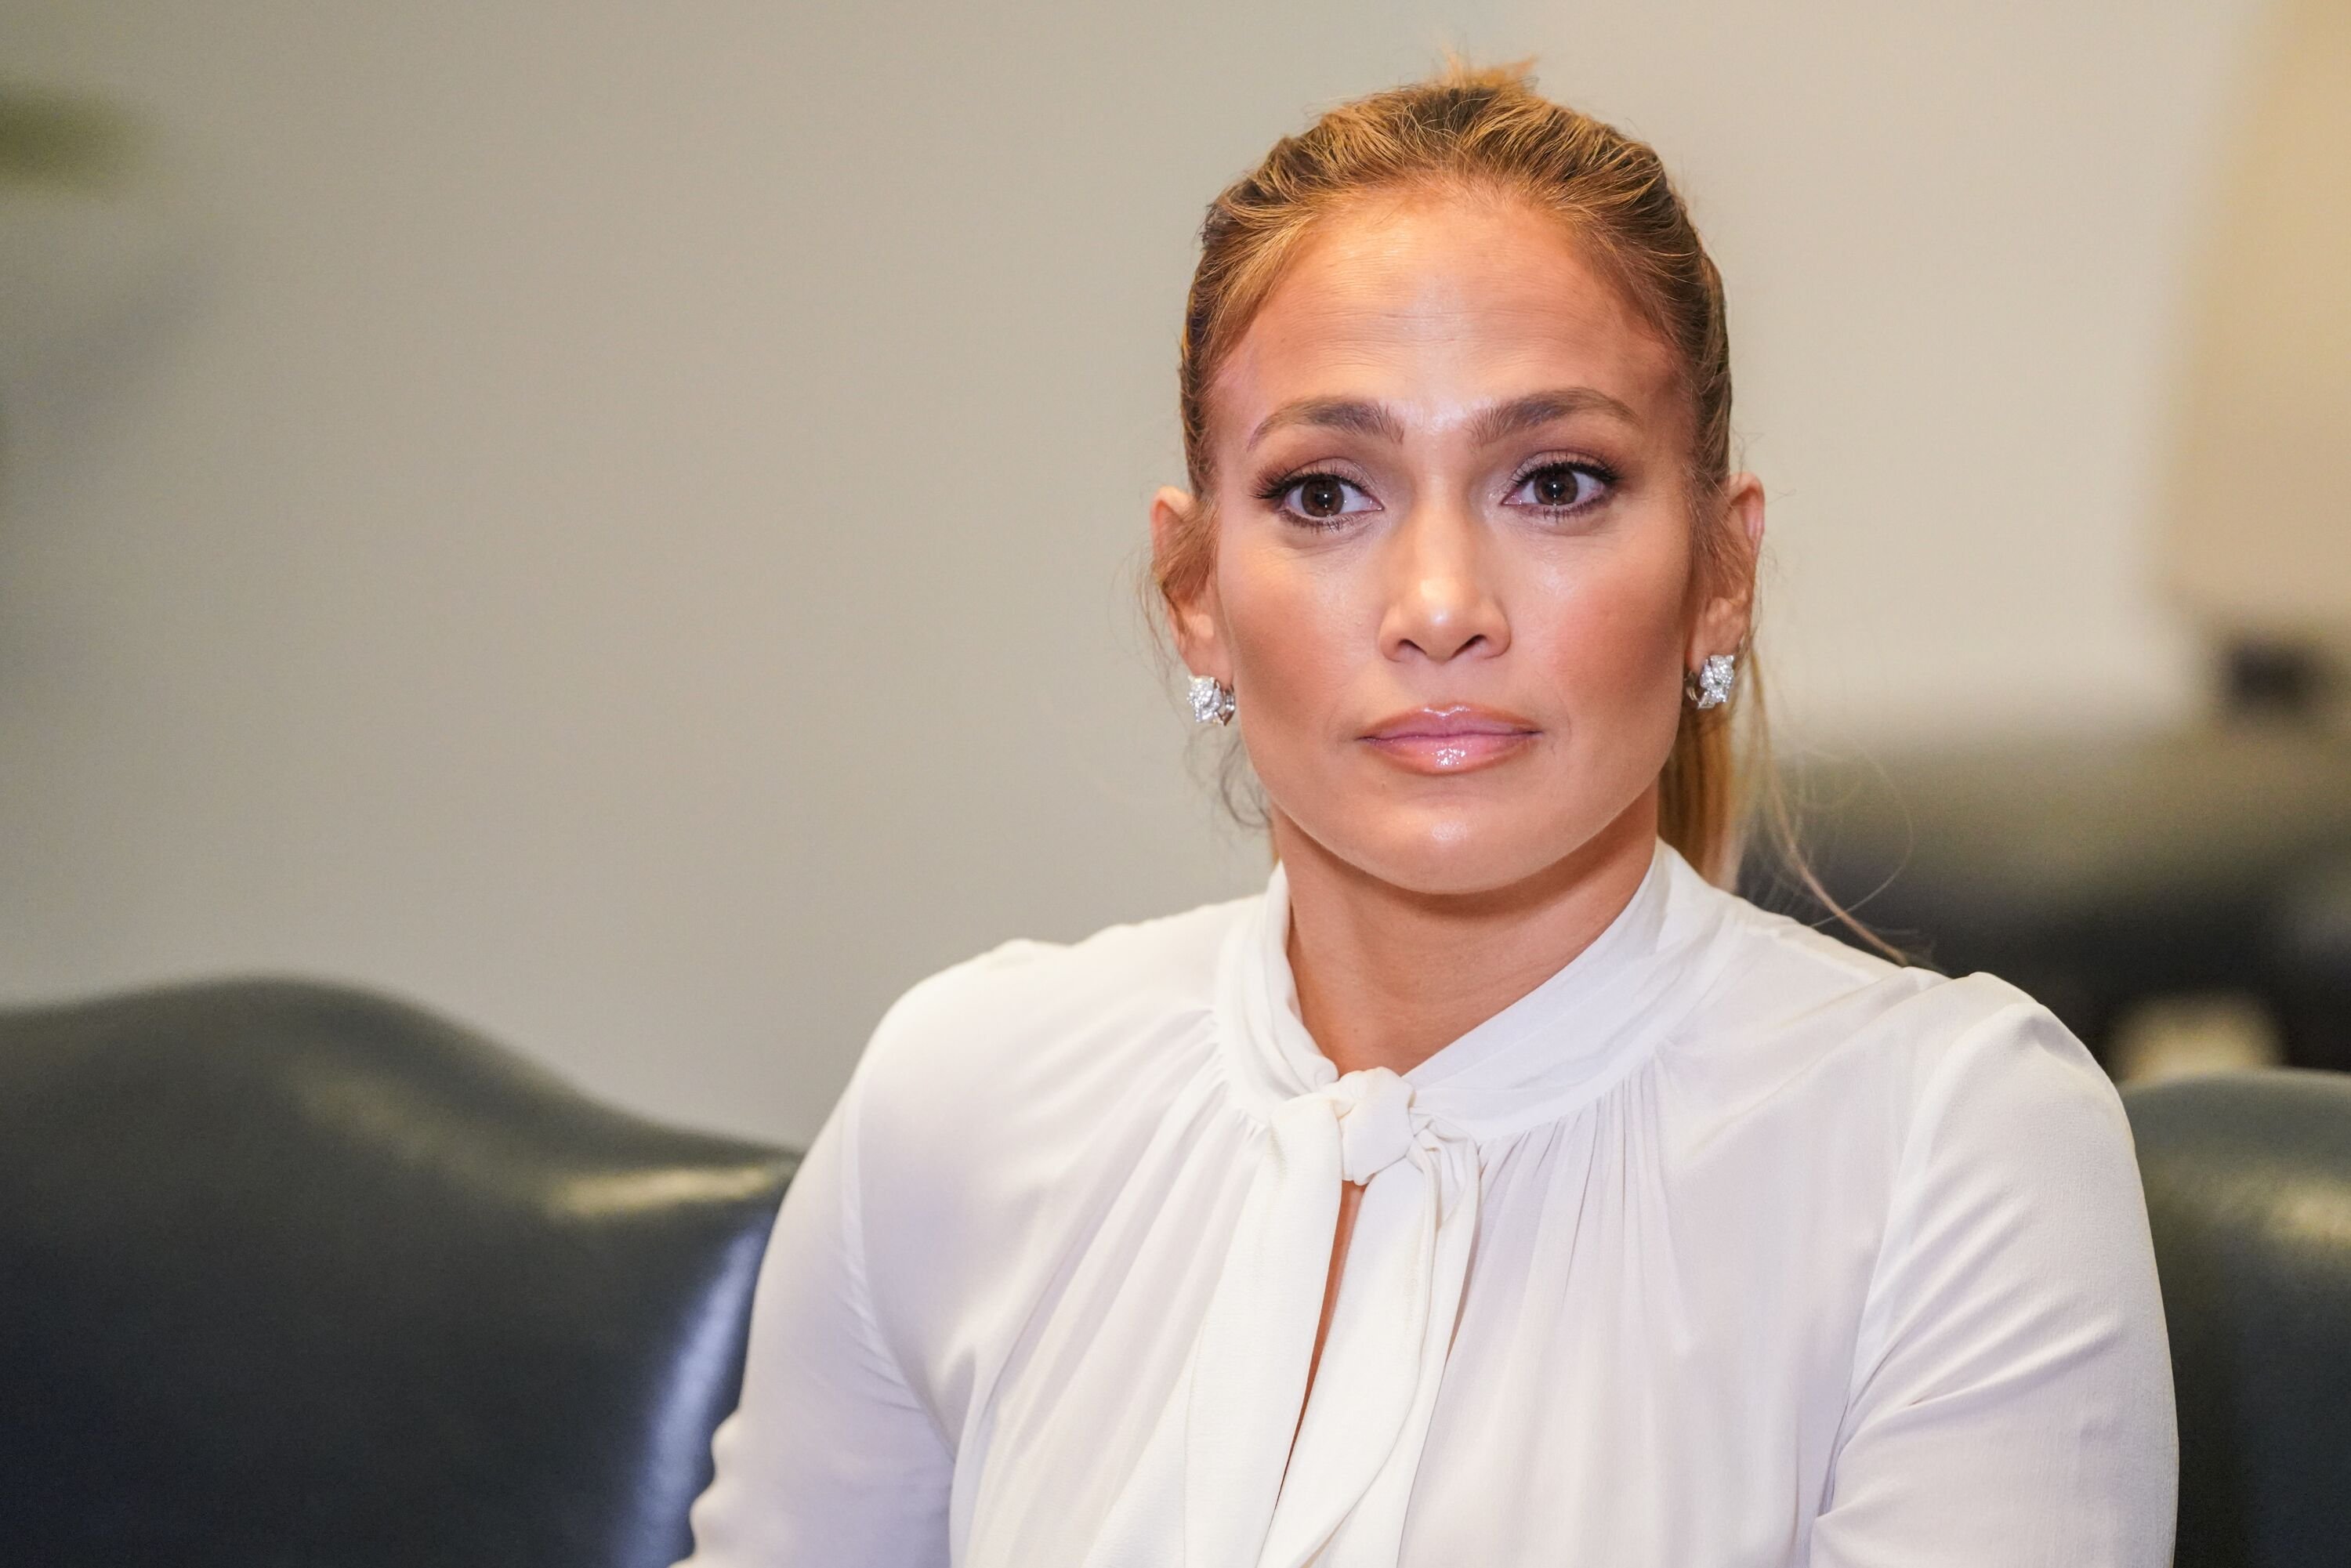 Jennifer Lopez attends "Project Destined" Yankees Shark Tank Presentations at Yankee Stadium on March 4, 2018 | Photo: Getty Images